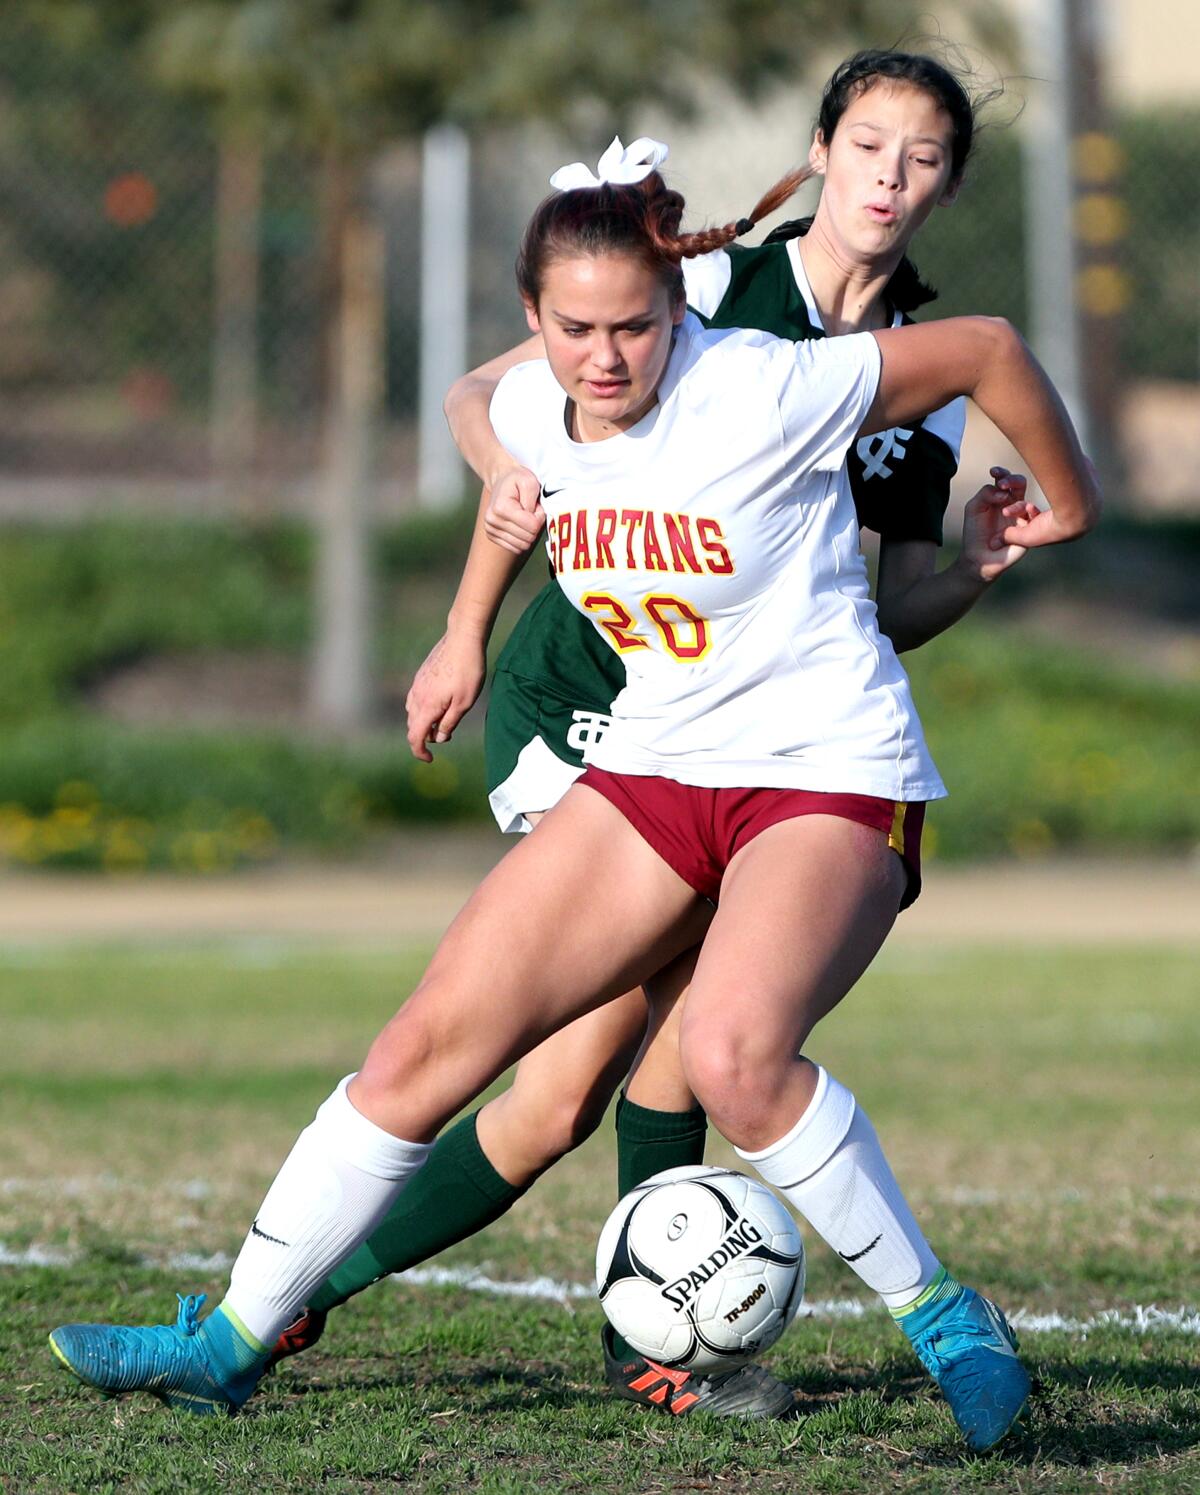 La Canada High School girls soccer player Haley Decker keeps the defender away from the ball in game vs. Temple City High in Temple City on Wednesday, Jan. 22, 2020.